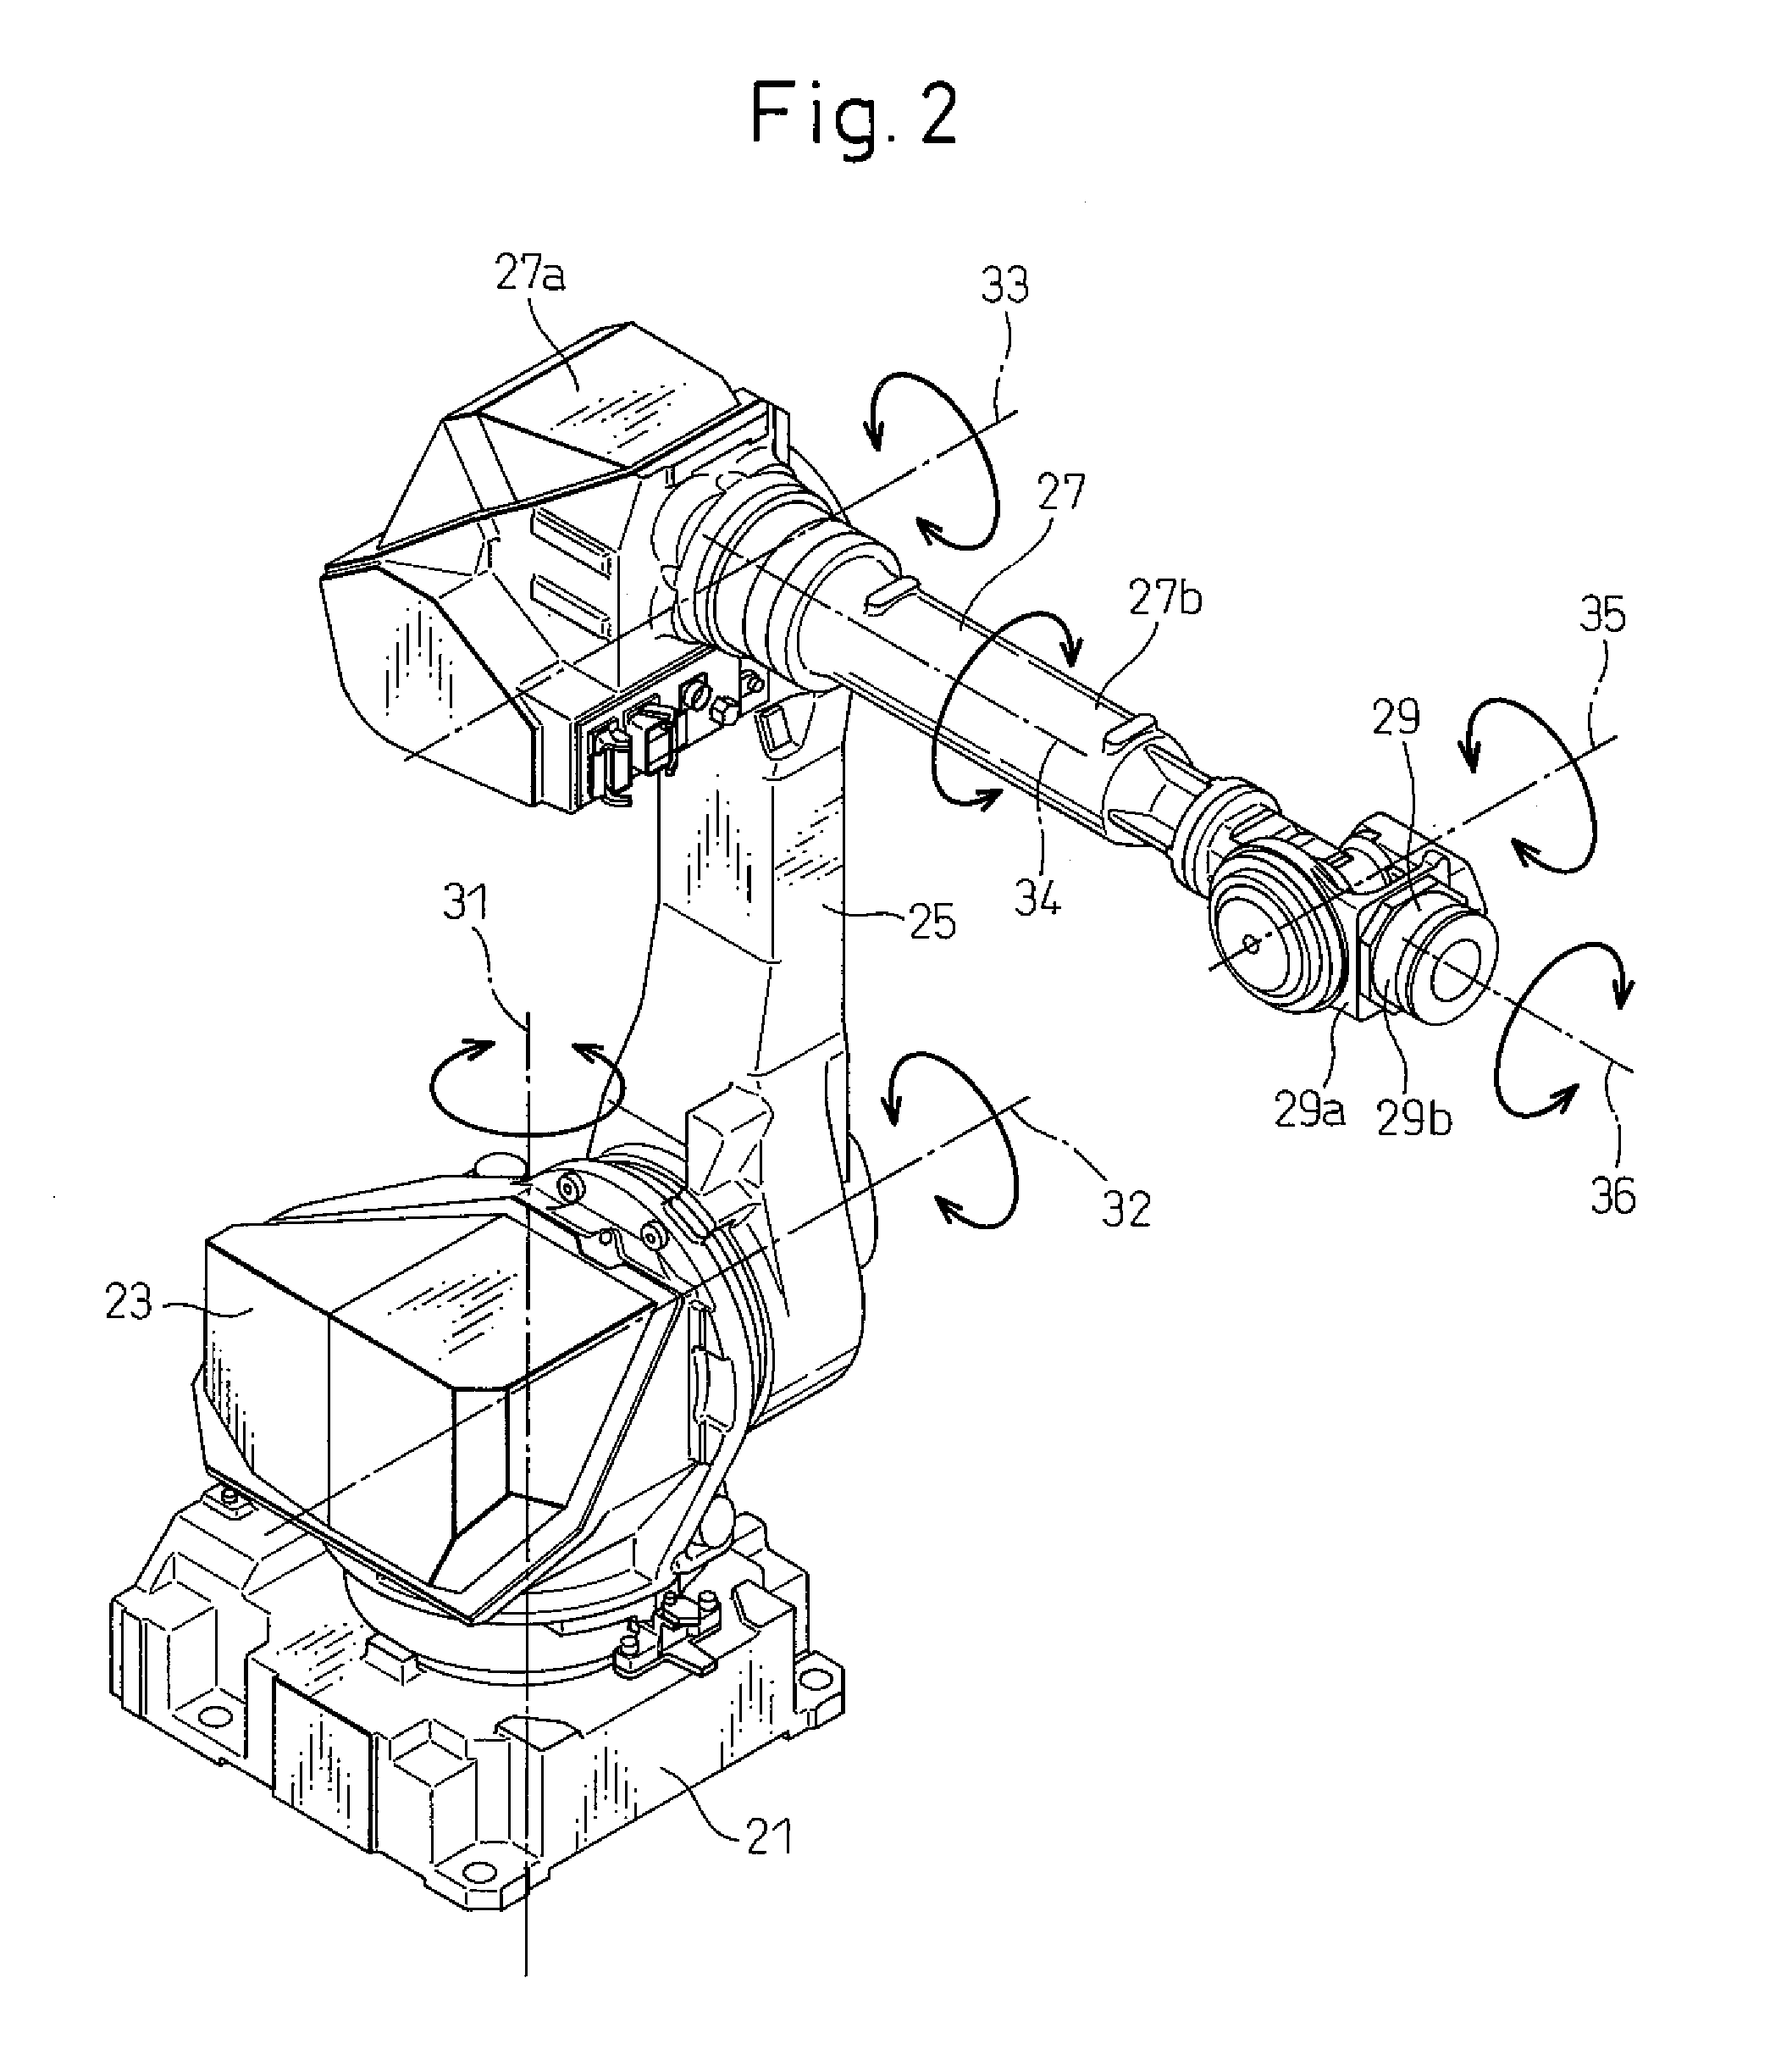 Robot system using robot to load and unload workpiece into and from machine tool